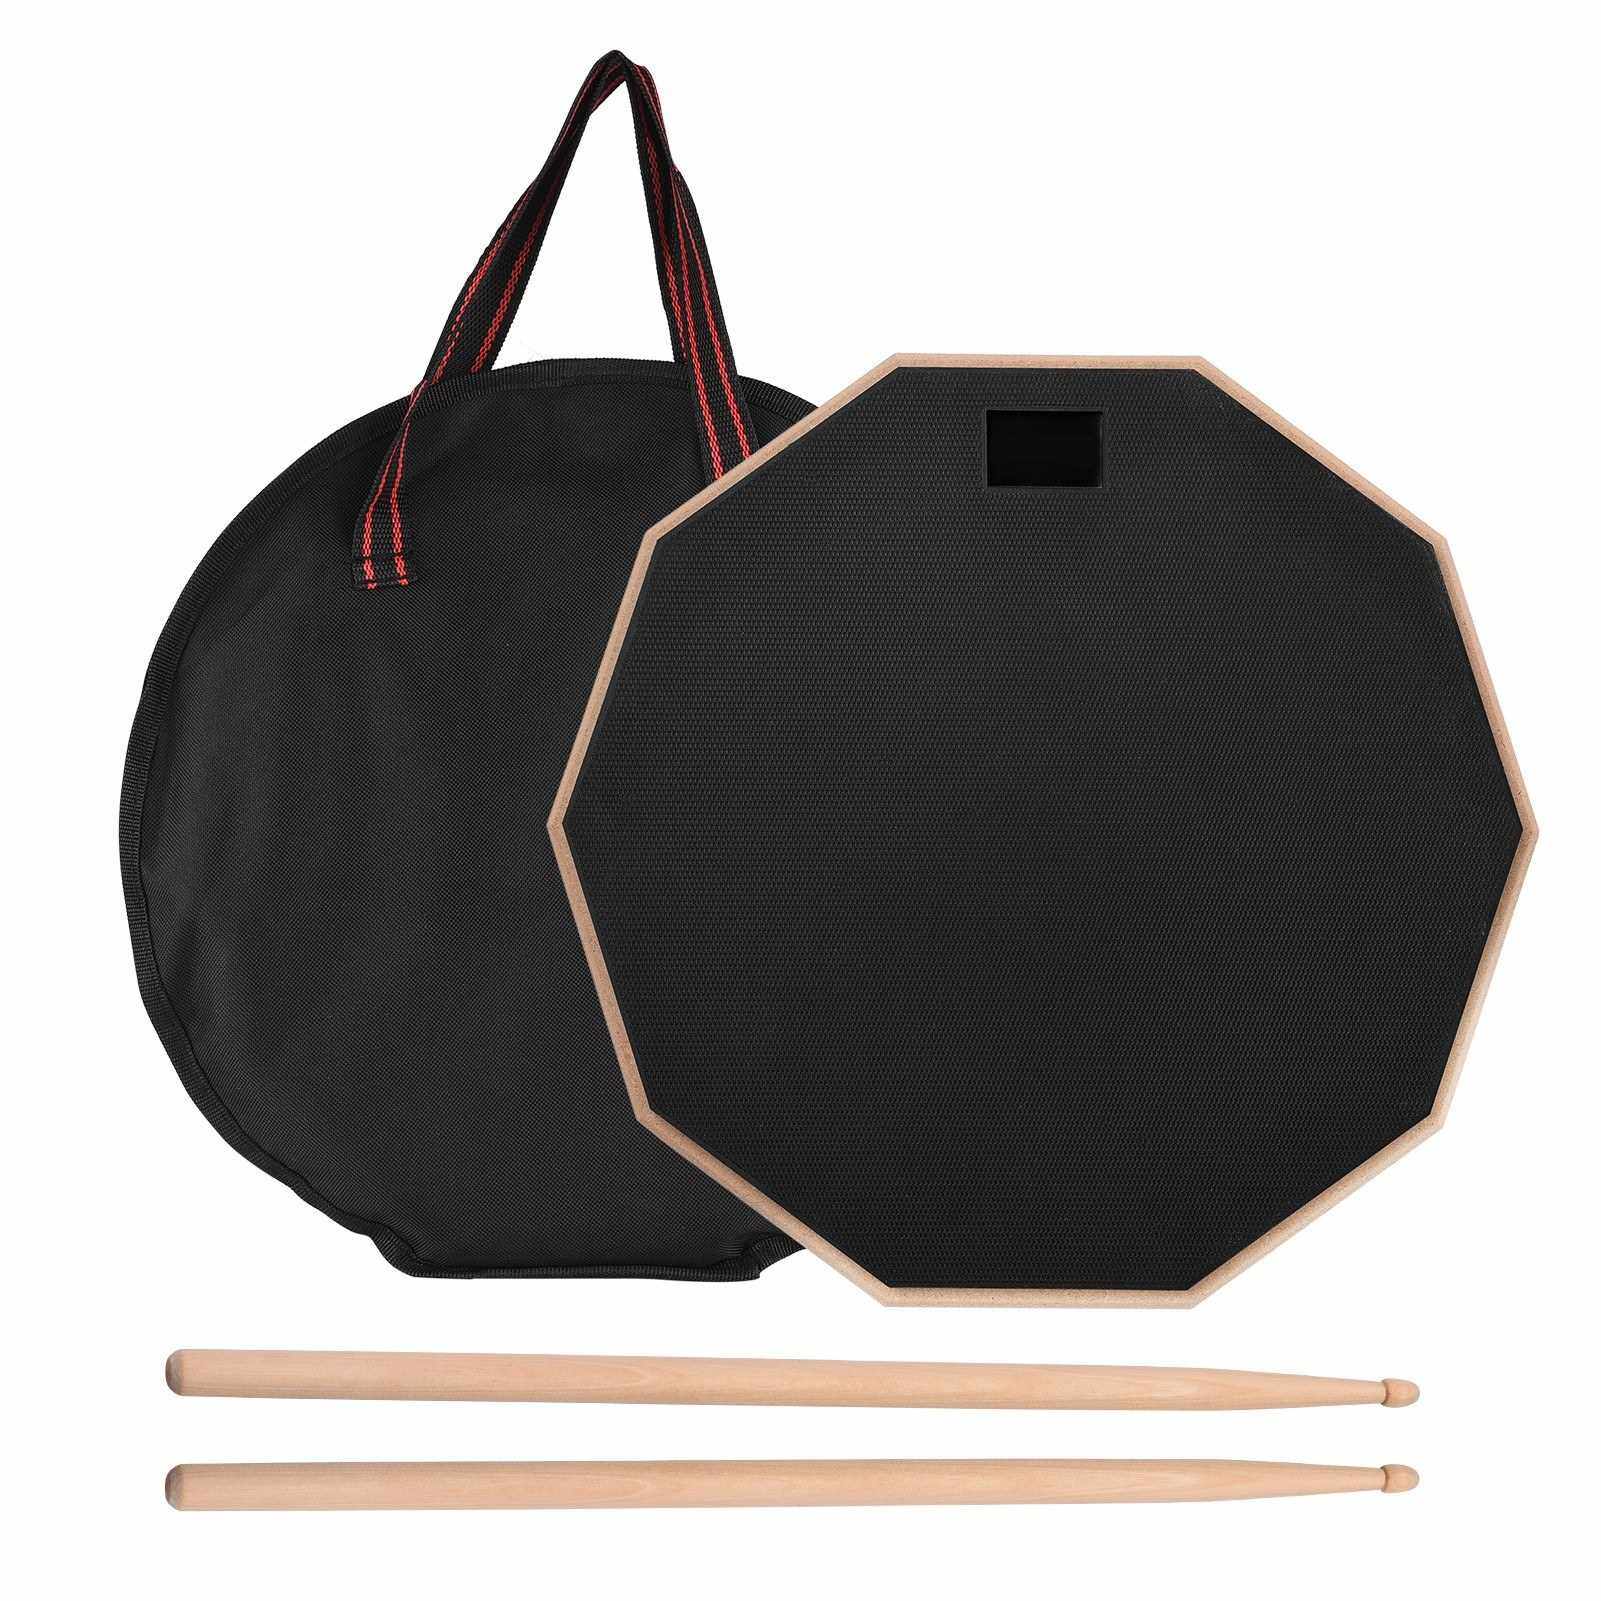 12 Inch Drum Practice Pad Mute Drum Pad with Drum Stick Carrying Bag for Students Beginners (Black)